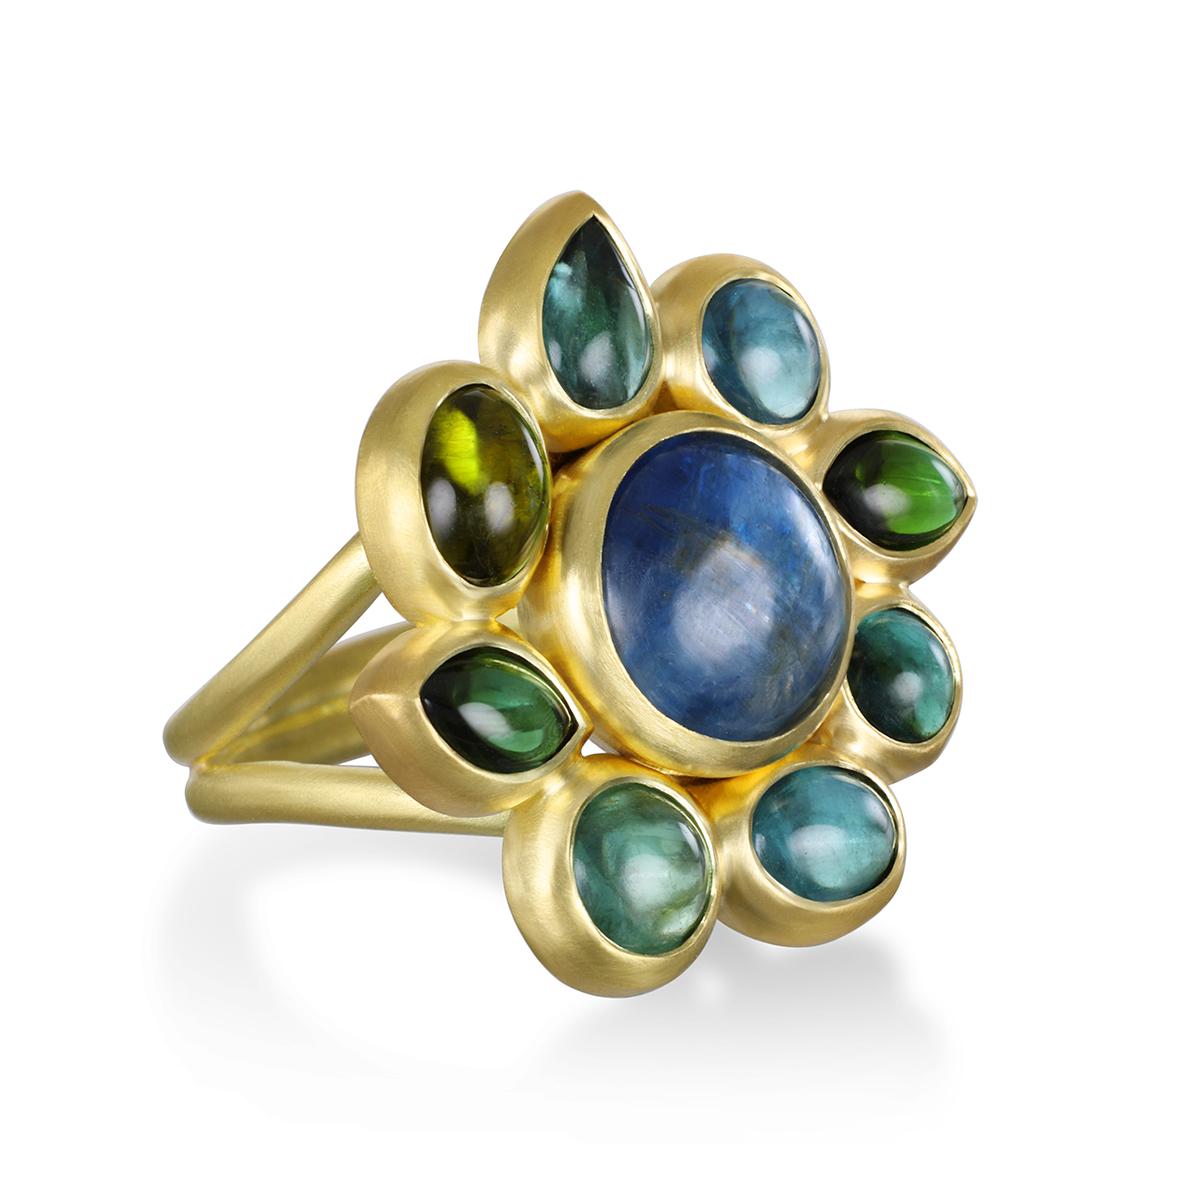 Unique, one of a kind and handcrafted - Faye Kim's 18 Karat Gold Blue-Green Tourmaline Daisy Ring, with its bezel settings and matte finish, blends the beauty of spectacular gemstones and nature into a singular masterpiece. Large center blue